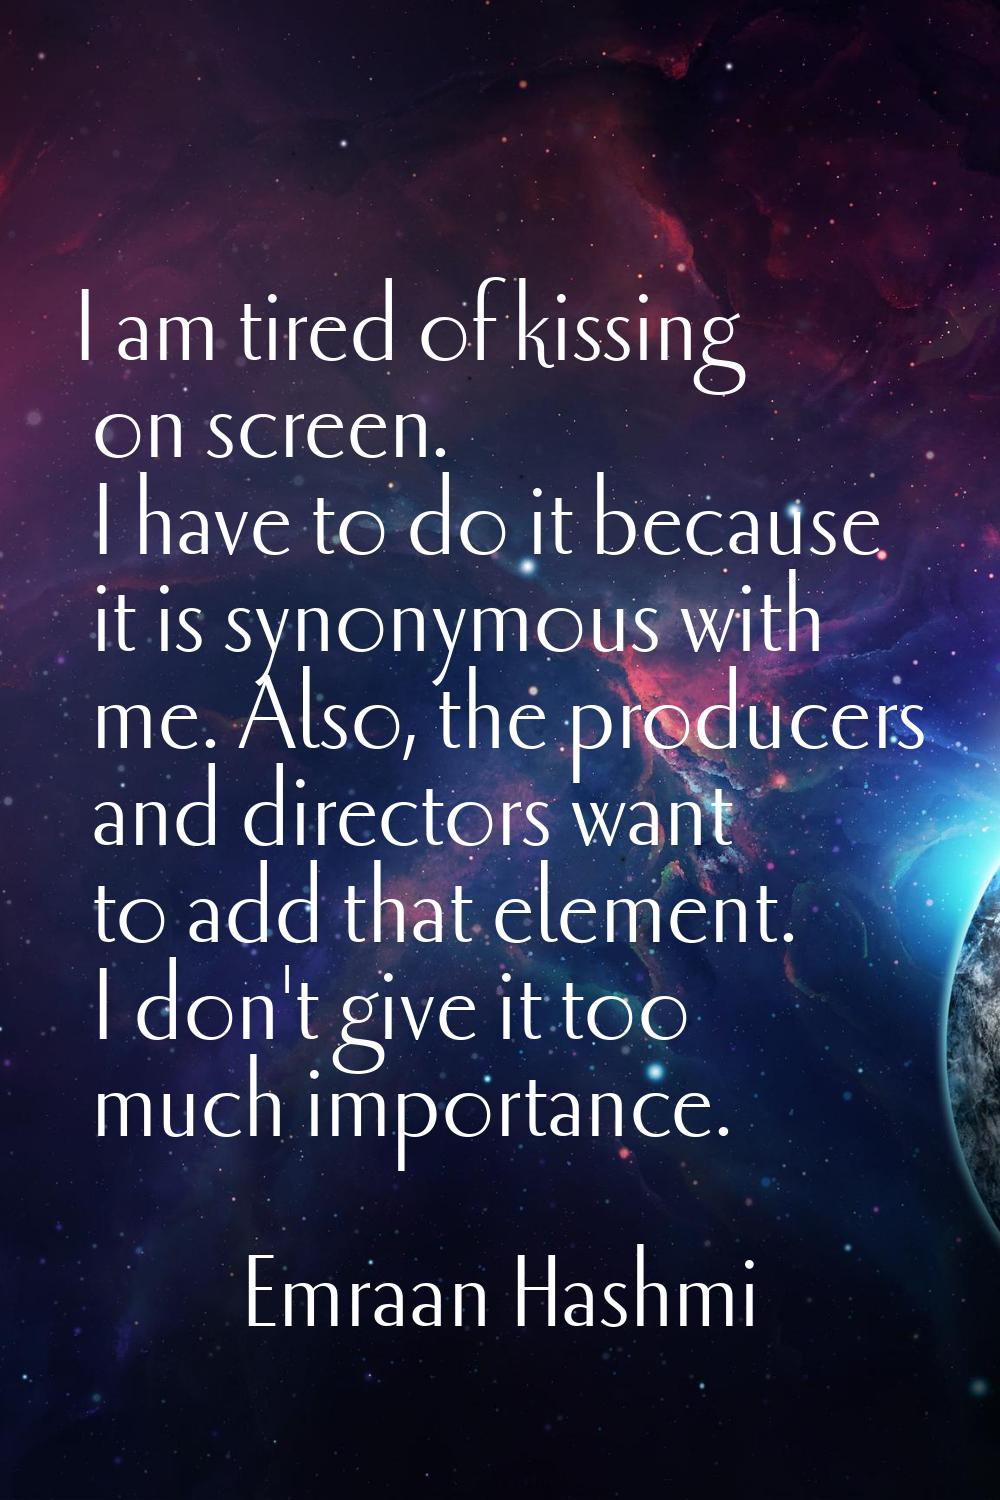 I am tired of kissing on screen. I have to do it because it is synonymous with me. Also, the produc